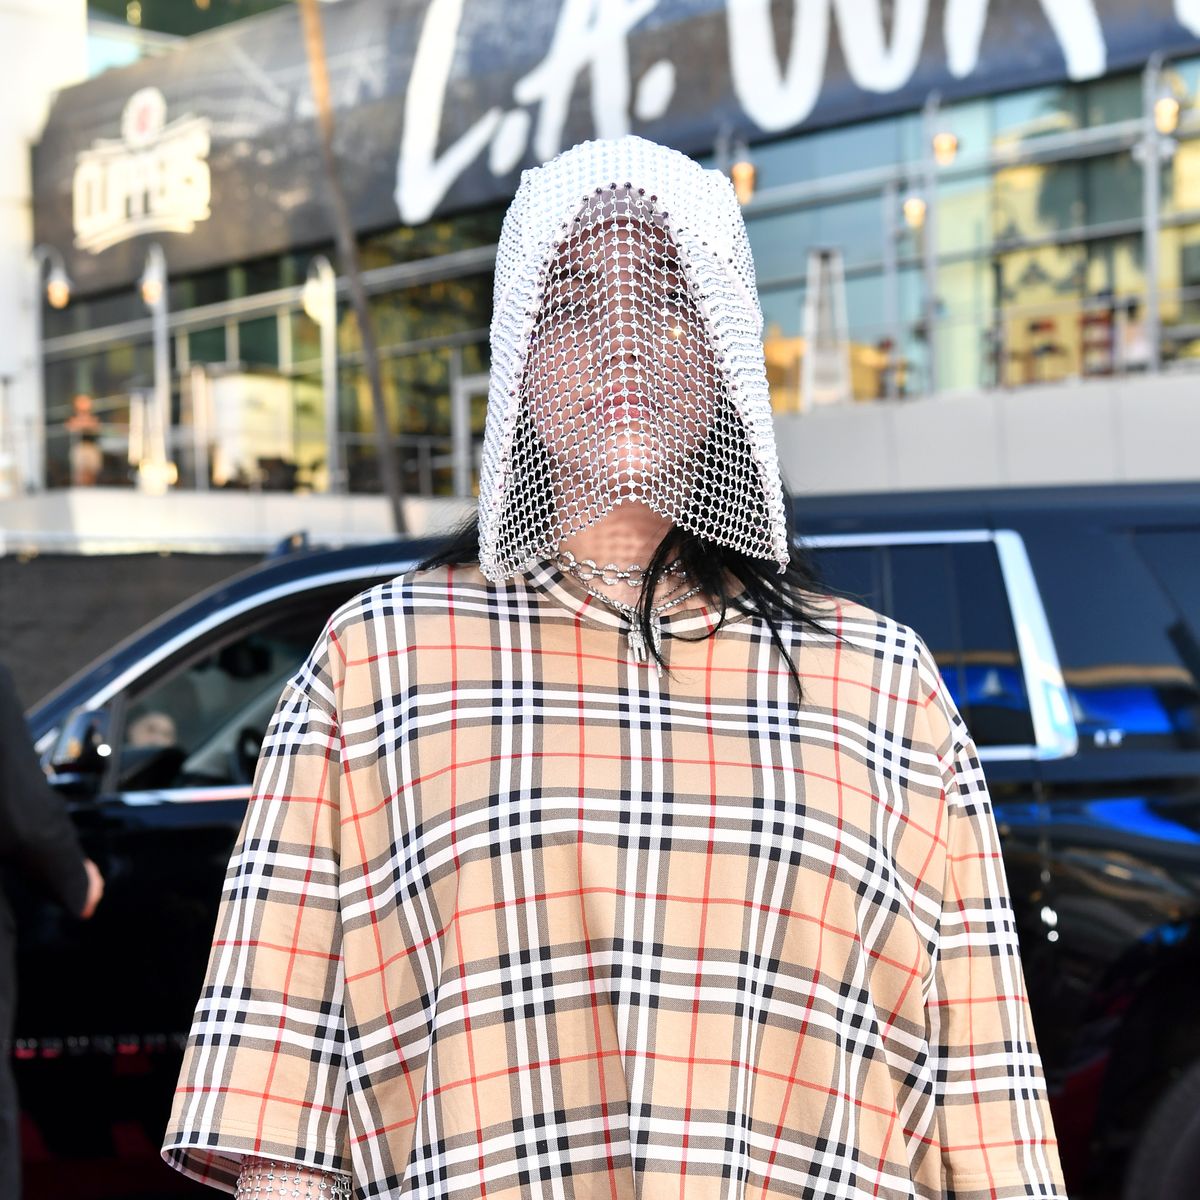 Billie Eilish Wore Head to Toe Burberry for the American Music Awards